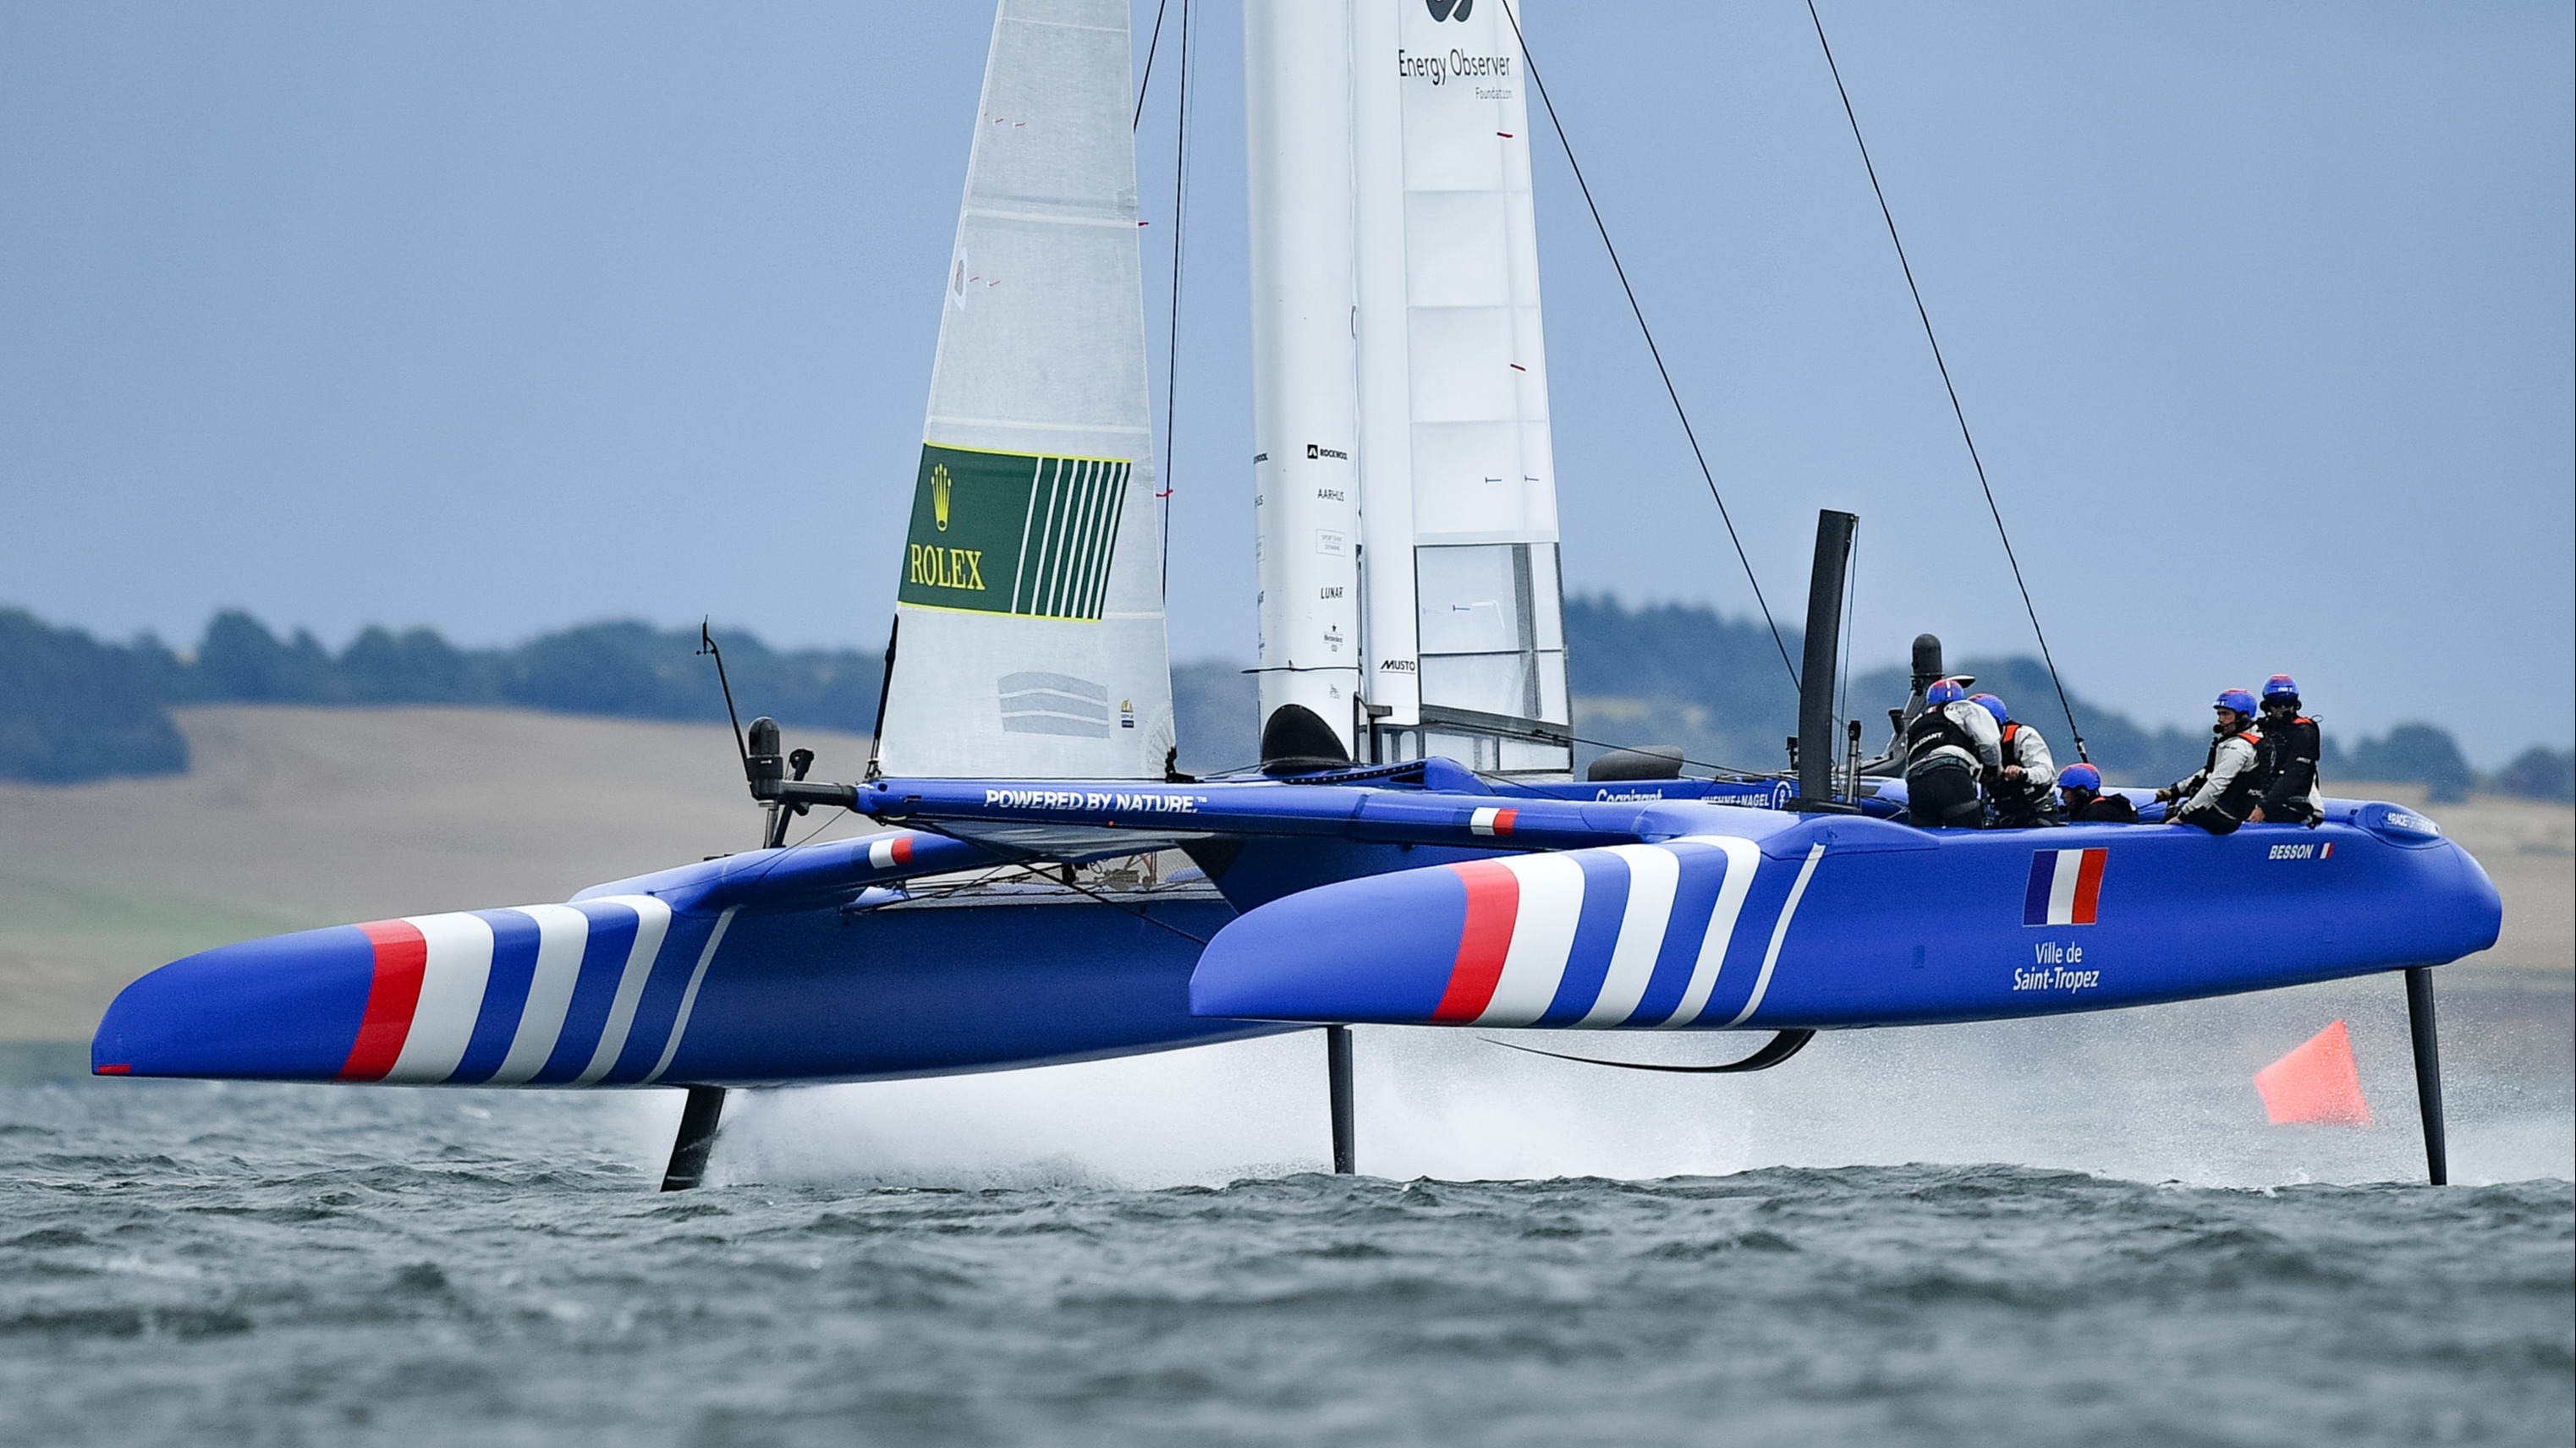 CONFIRMED Crew lists and athlete substitutions for the France Sail